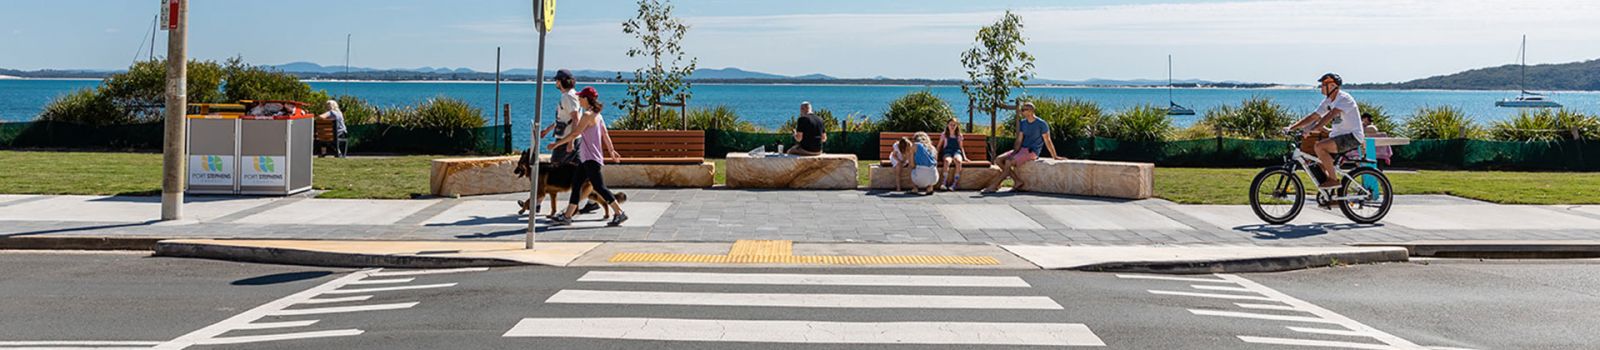 Image of a pedestrian crossing over looking the beach  banner image